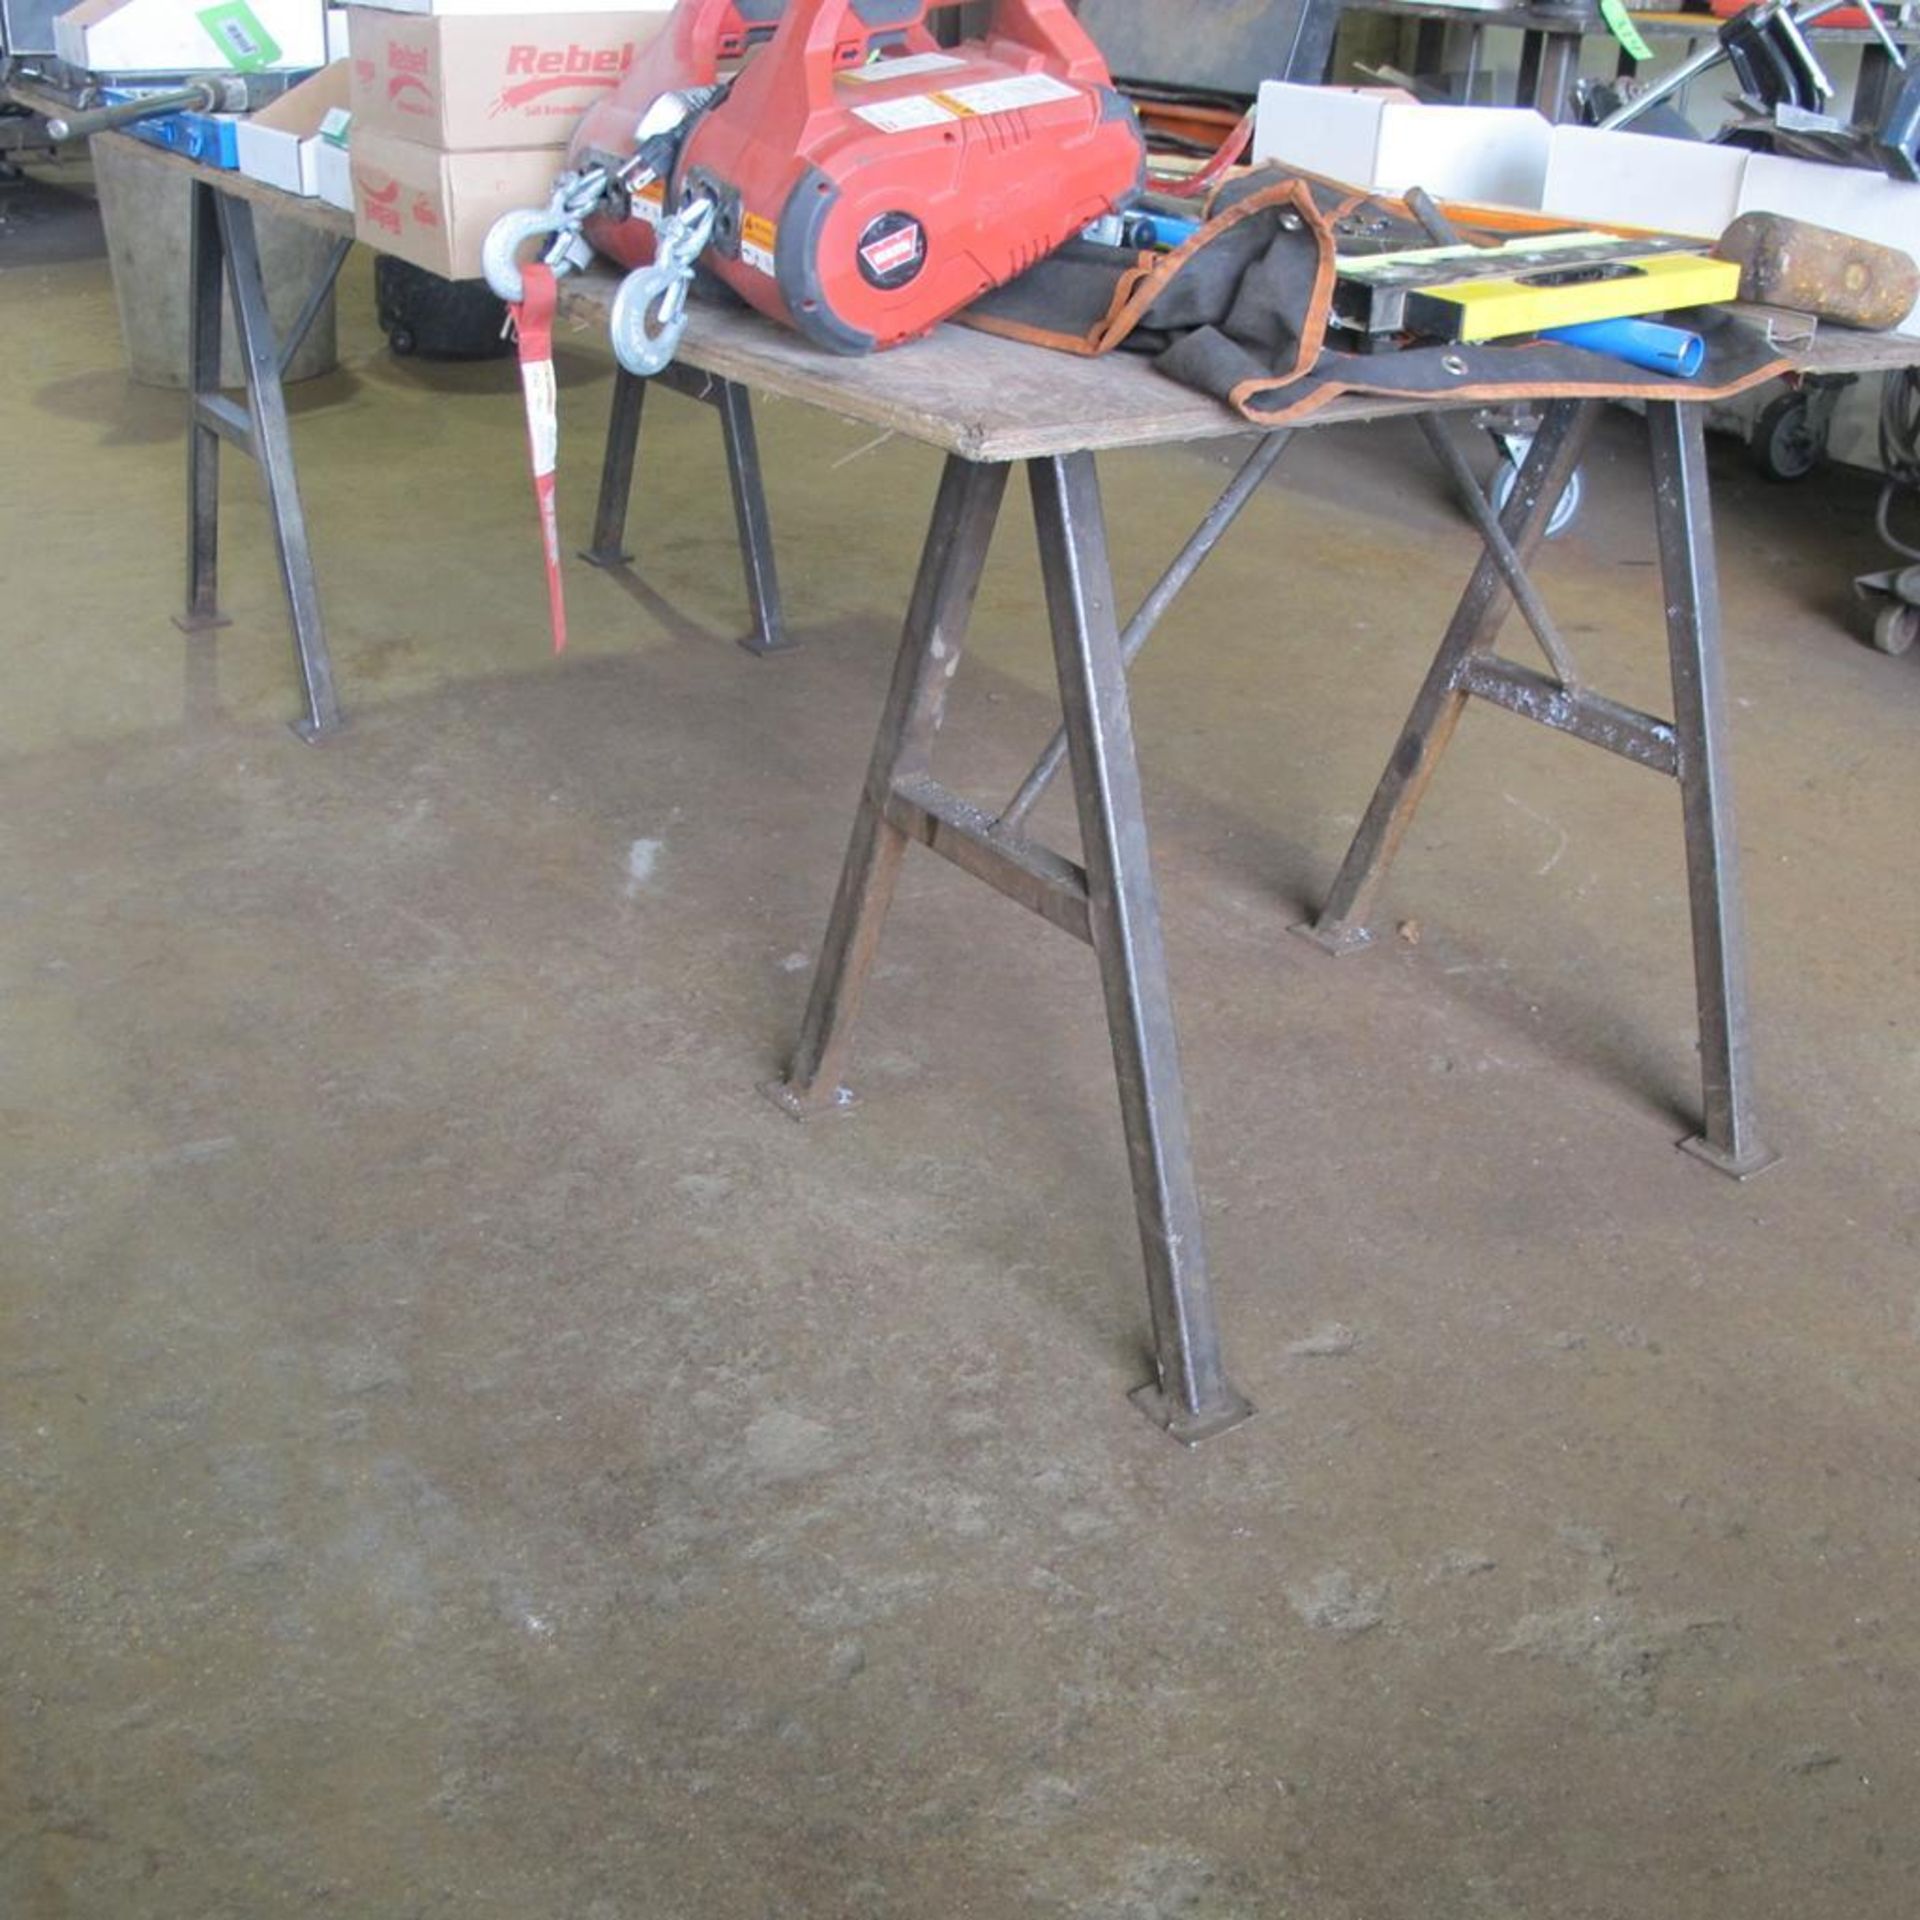 LOT OF 13 METAL SAW HORSES AND 4 SHEETS OF PLYWOOD (MAIN BLDG) - Image 2 of 5